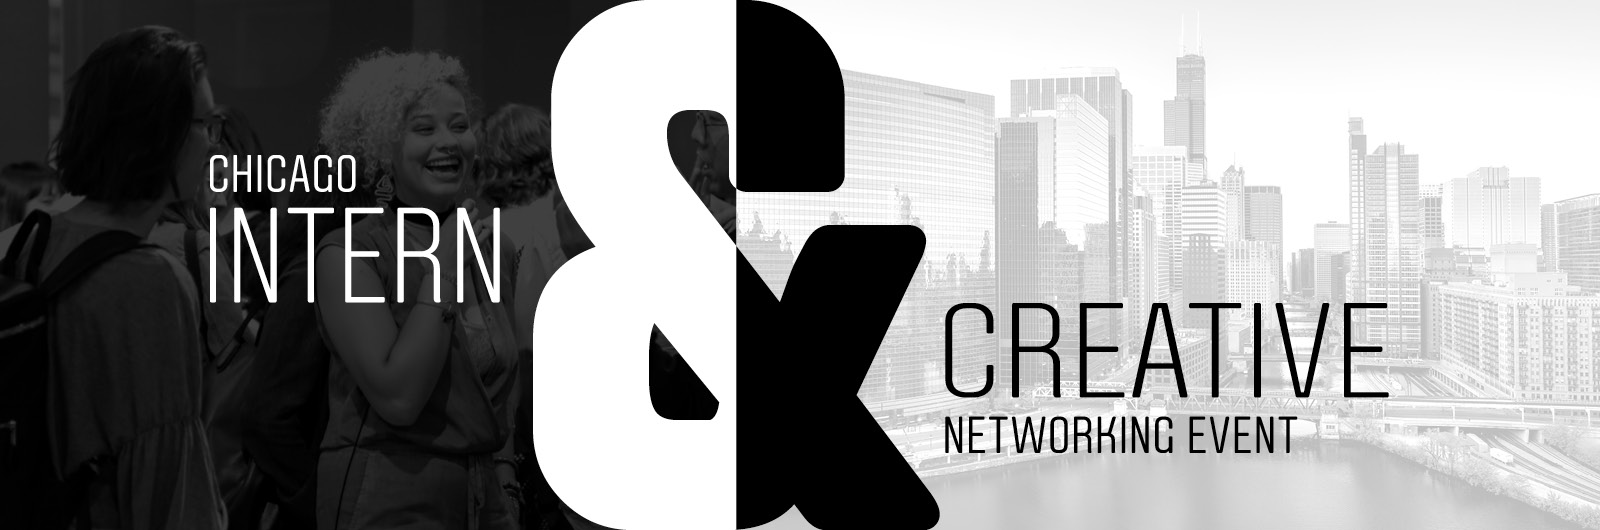 Chicago Intern and Creative - Networking Event 2020